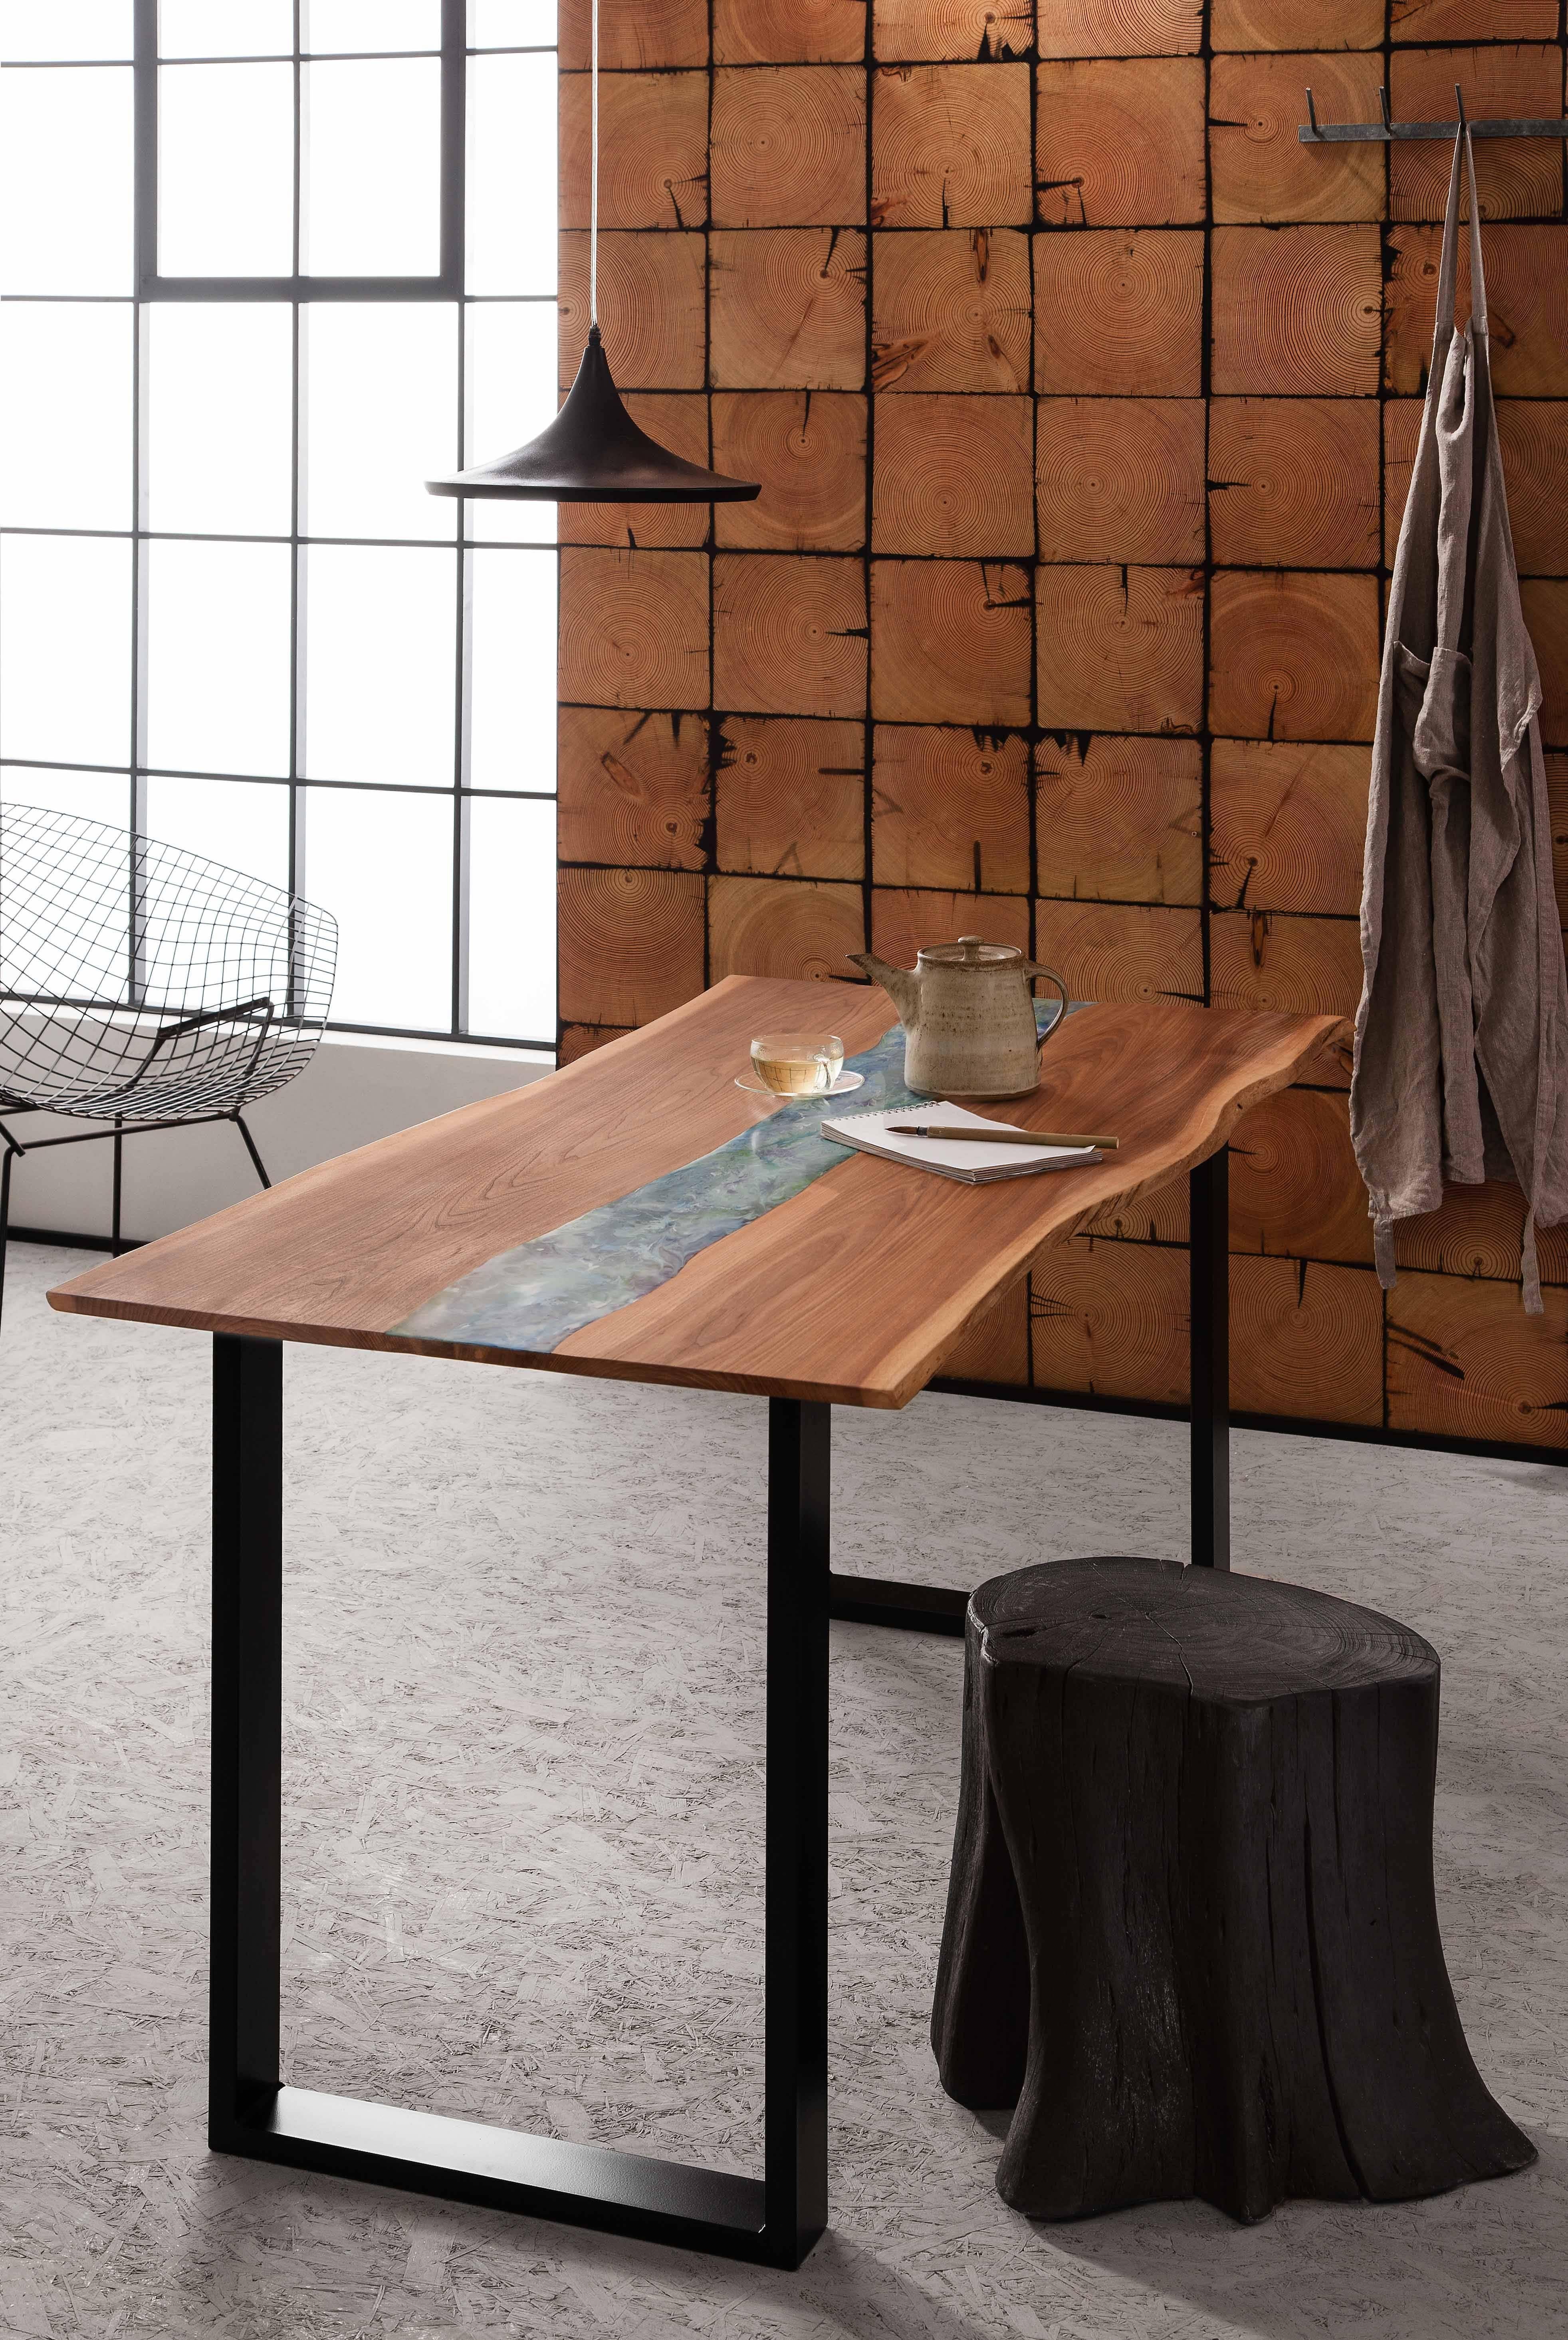 Exclusive art furniture for the home.
New for 2017, the resin art tables fuse natural live edge boards with flowing lines of hand poured resin art. 
Sustainably sourced live edge Elm is paired with resin inlay in a variety of colours, the unique